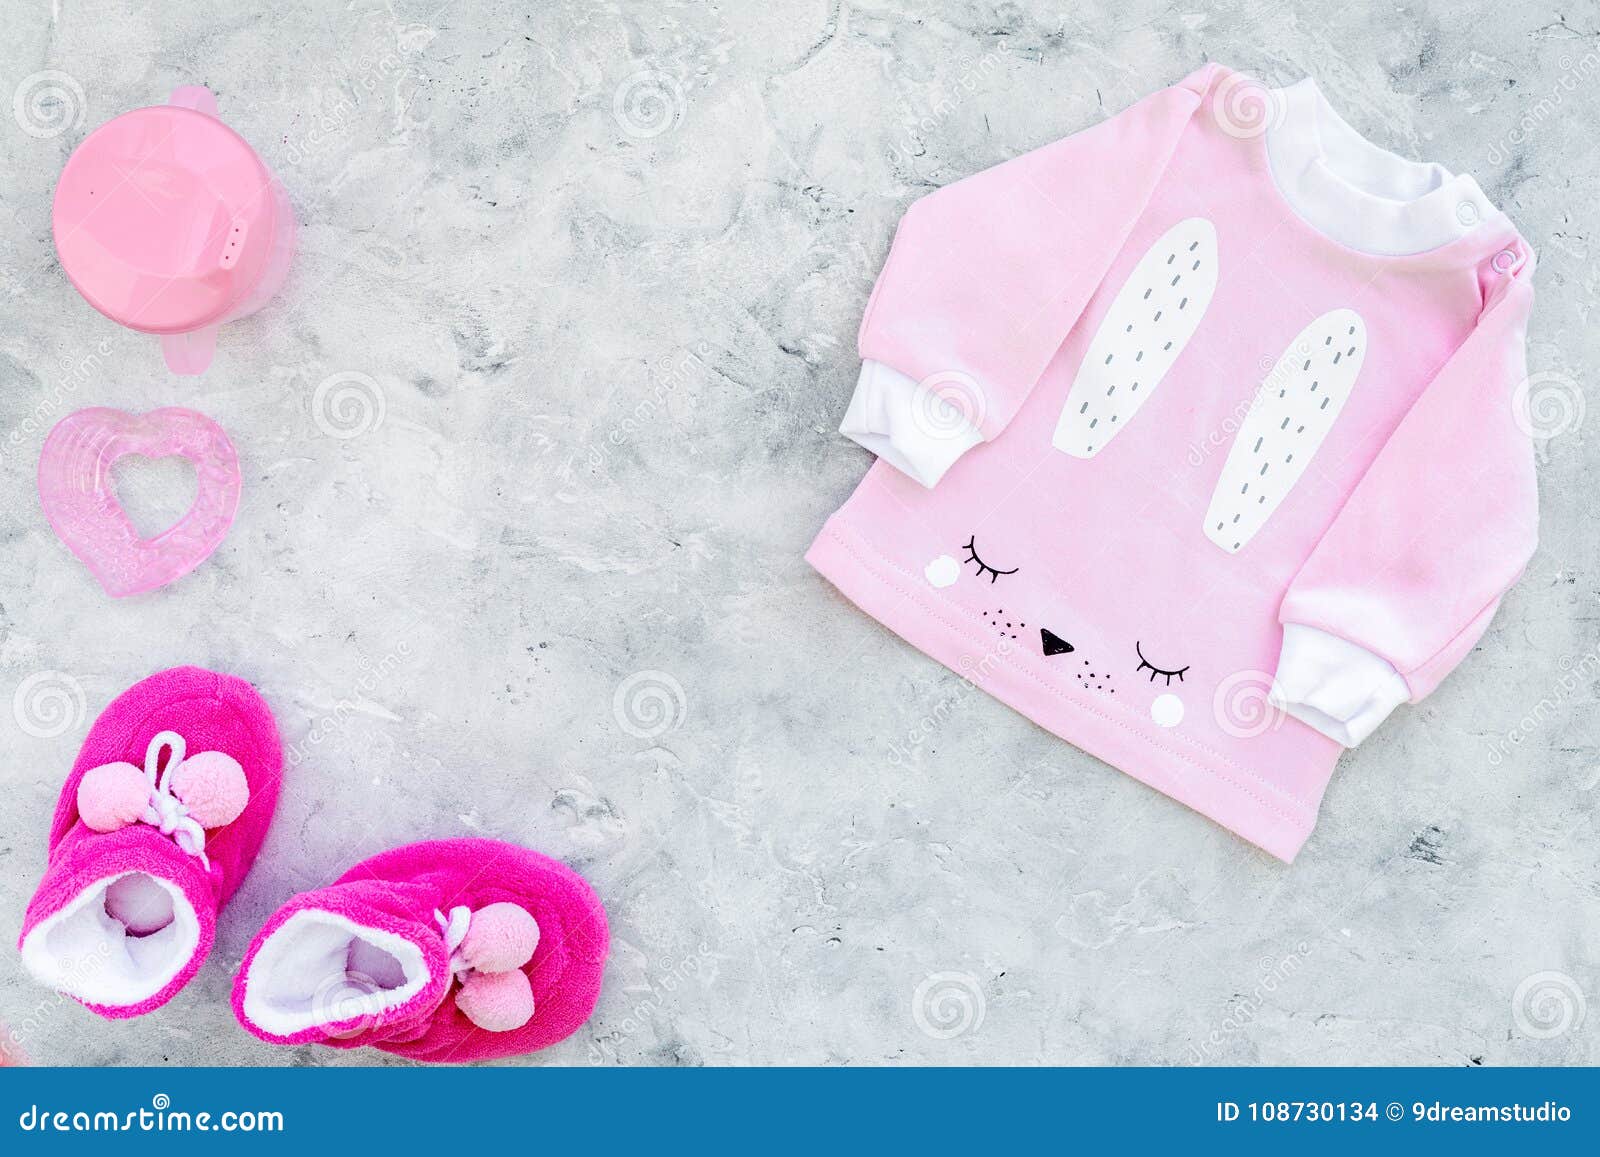 Cute Pink Baby Clothes for Girl. Shirt, Booties, Toy, Bottle on Grey ...